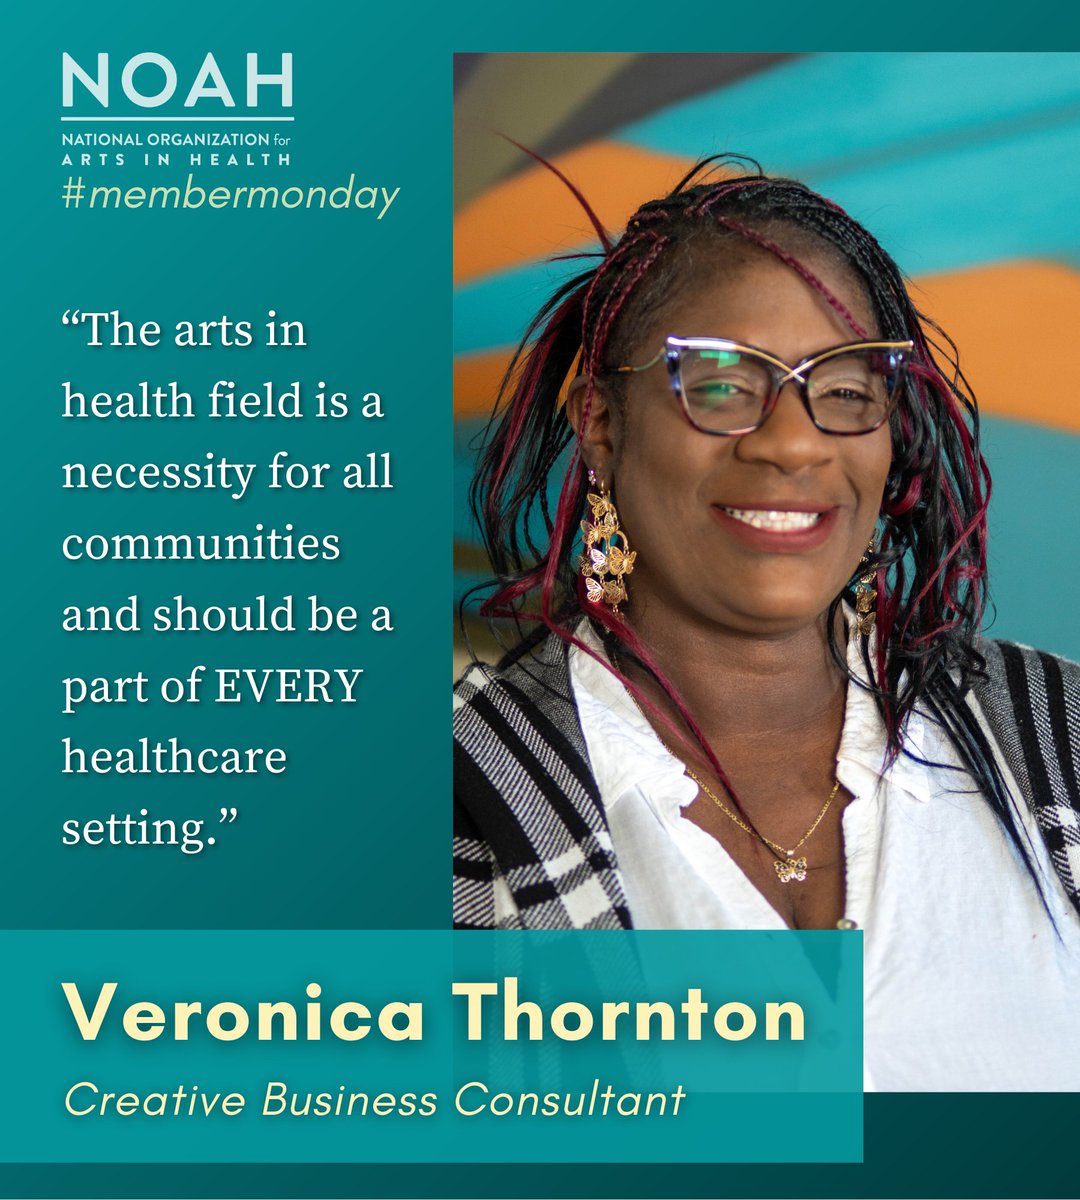 'What I love about arts in health is its versatility and use of the universal language of art that crosses cultures, borders and abilities stripping the systemic divisions that exist to enhance health and wellness in our society.'